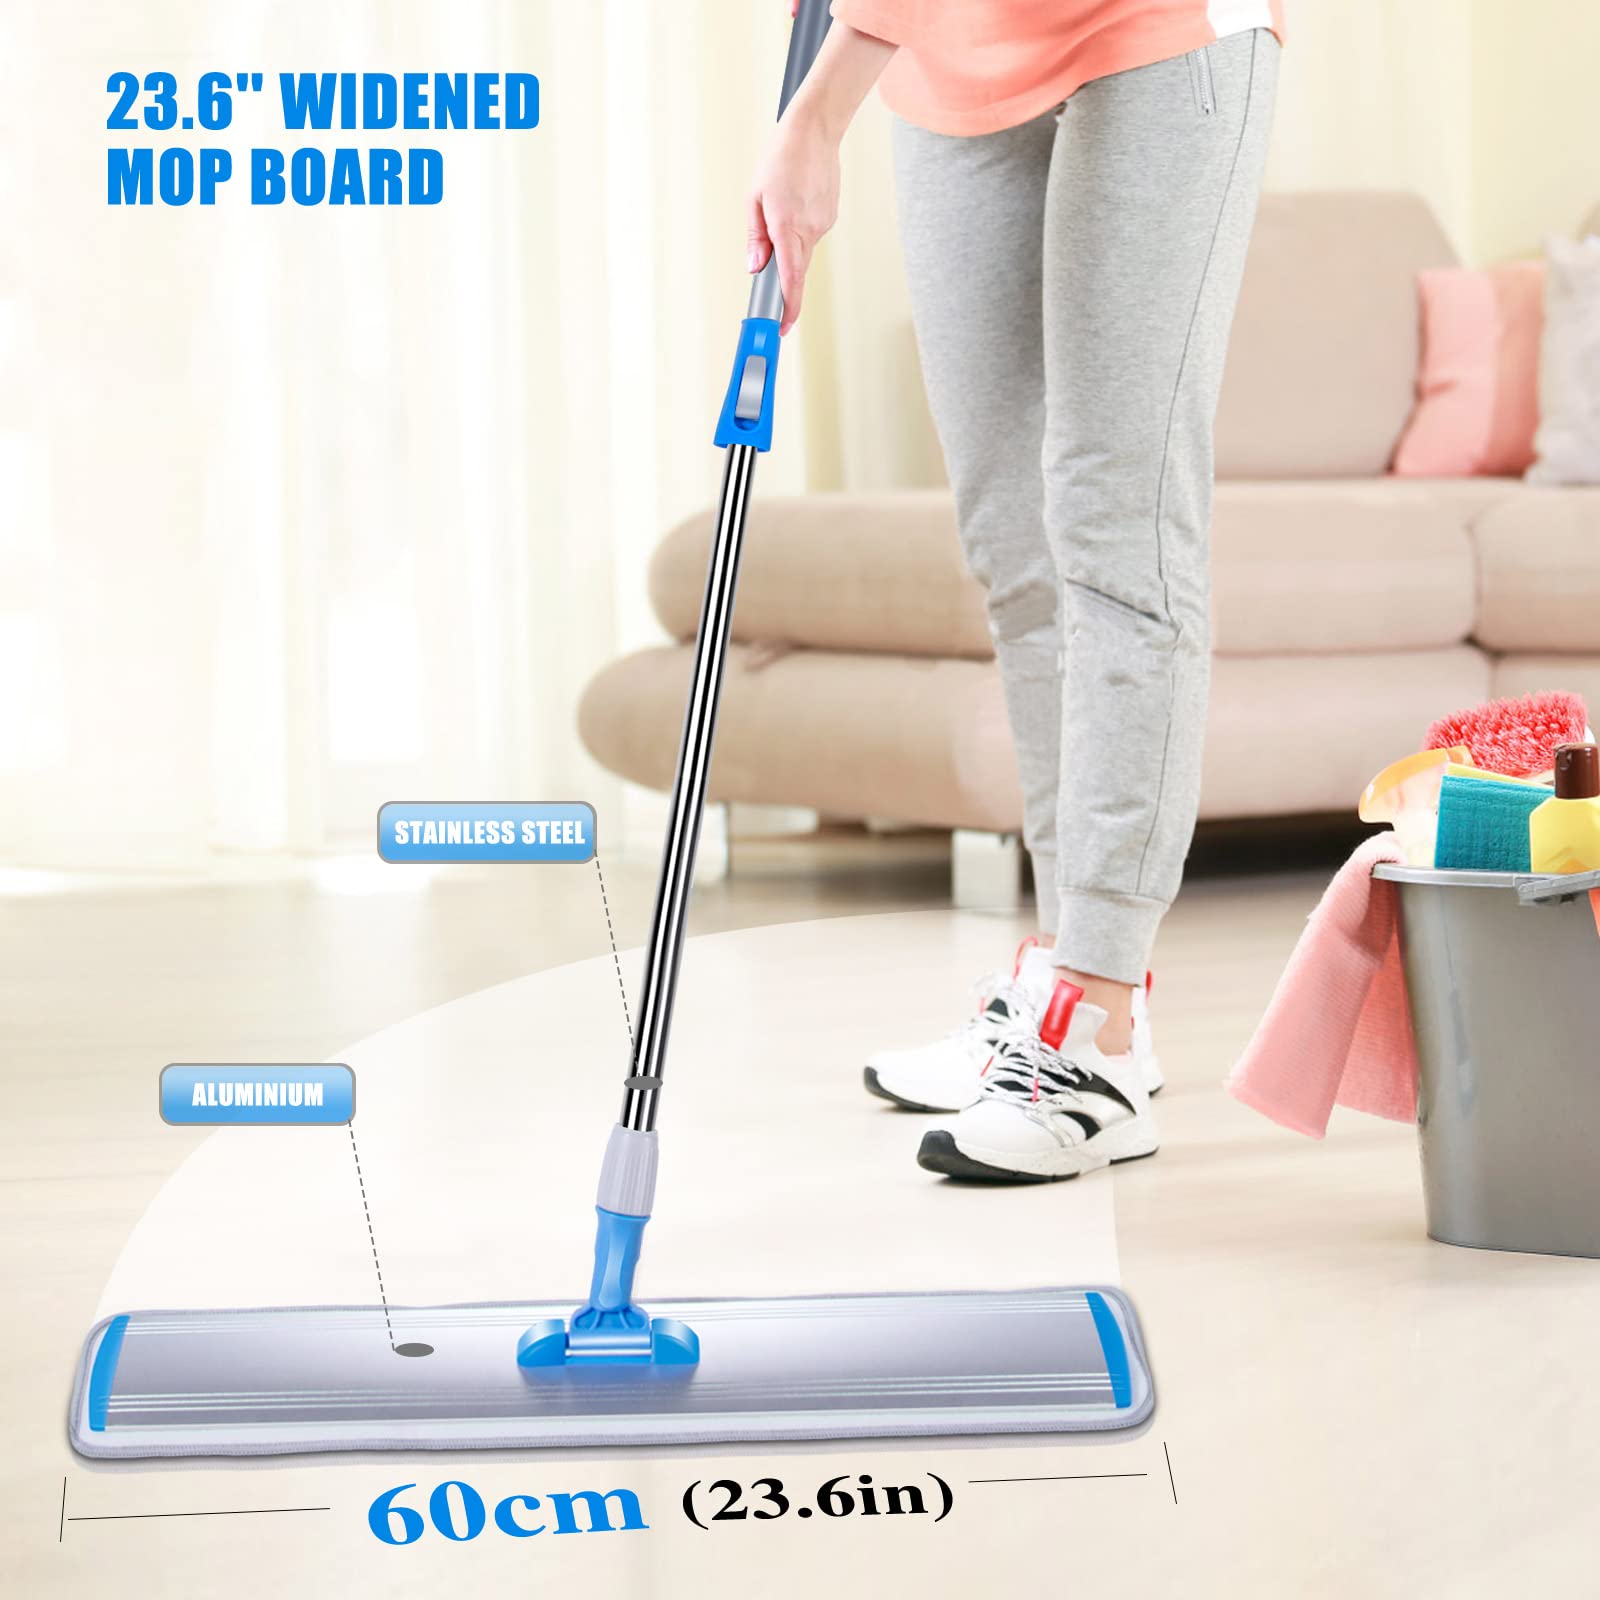 Masthome Commercial Wet Mop 24'' Large Microfiber Mop,Aluminum Flat Mop with Adjustable Stainless Steel for Wet and Dust Cleaning Heavy Duty Floor Mop with 5 Mop Pads and 1 Cleaning Scraper